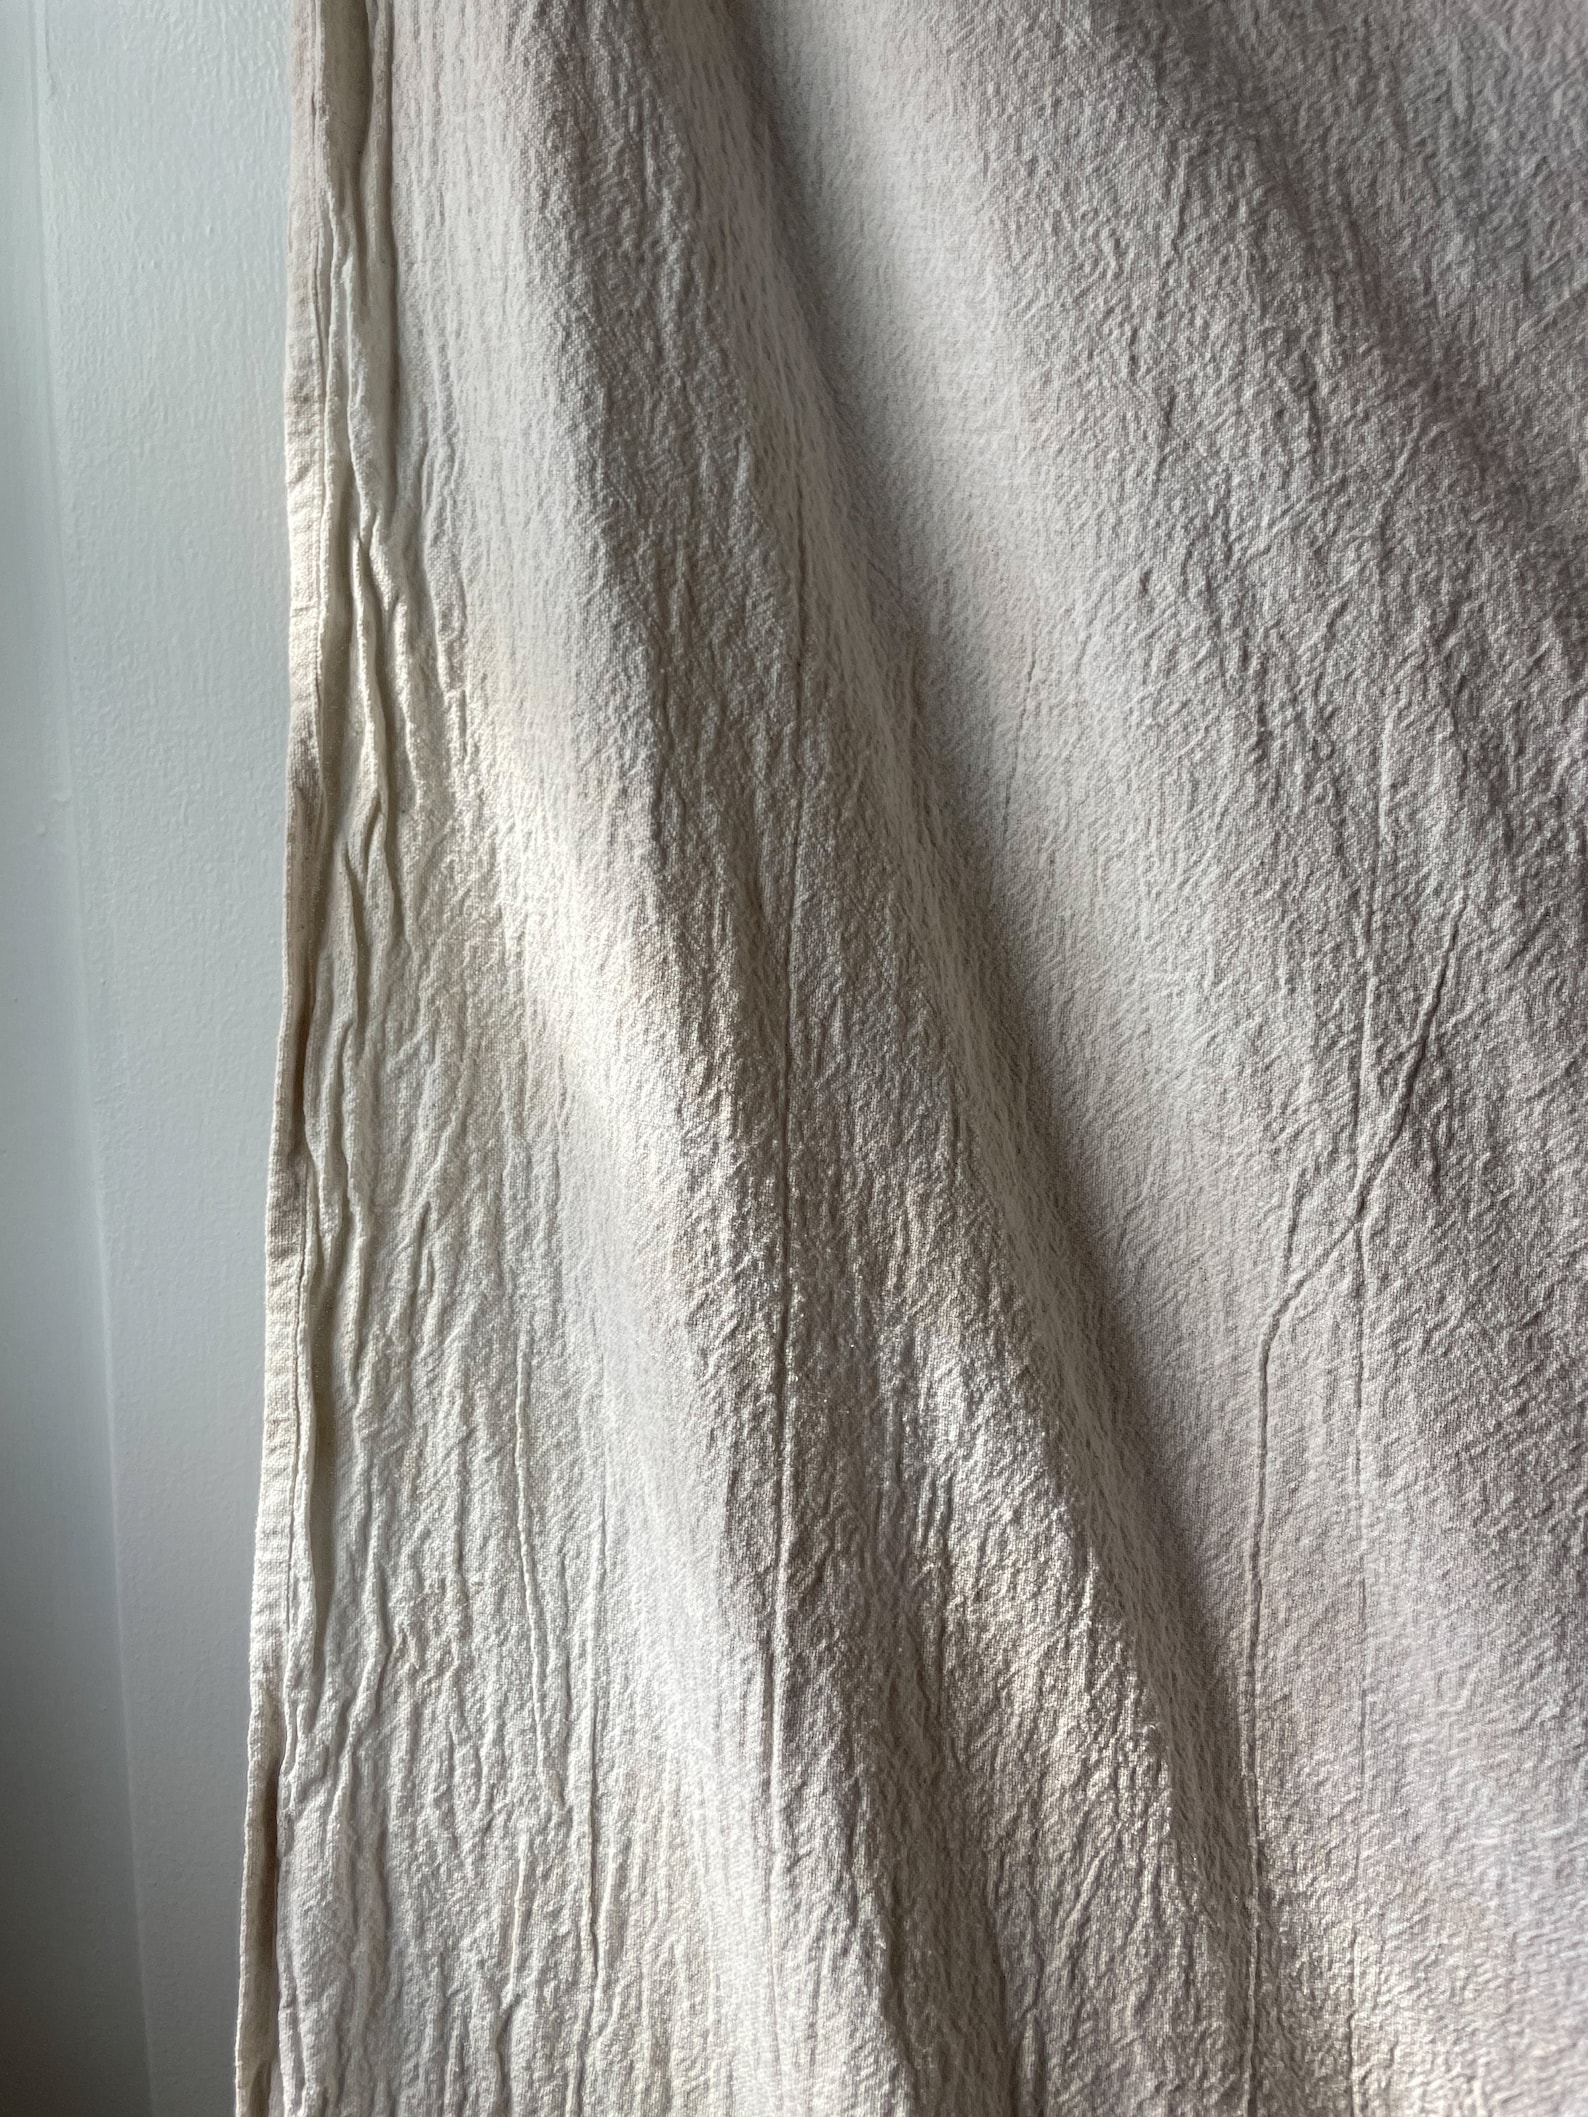 Hand-dyed Cotton Canvas Backdrop / Photo Background in IVORY - Etsy